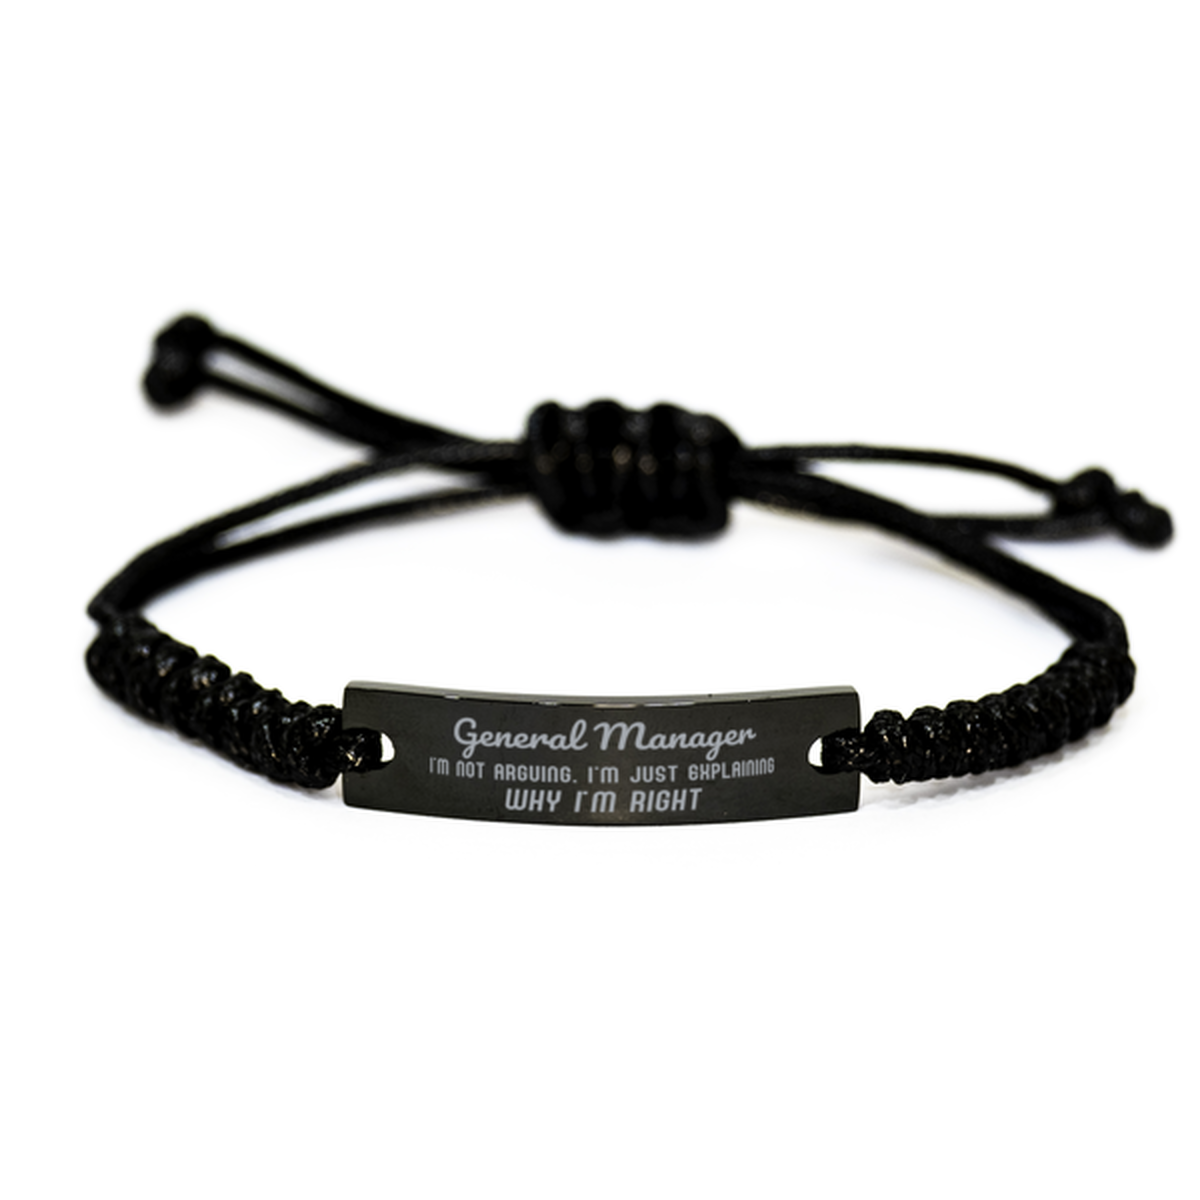 General Manager I'm not Arguing. I'm Just Explaining Why I'm RIGHT Black Rope Bracelet, Funny Saying Quote General Manager Gifts For General Manager Graduation Birthday Christmas Gifts for Men Women Coworker